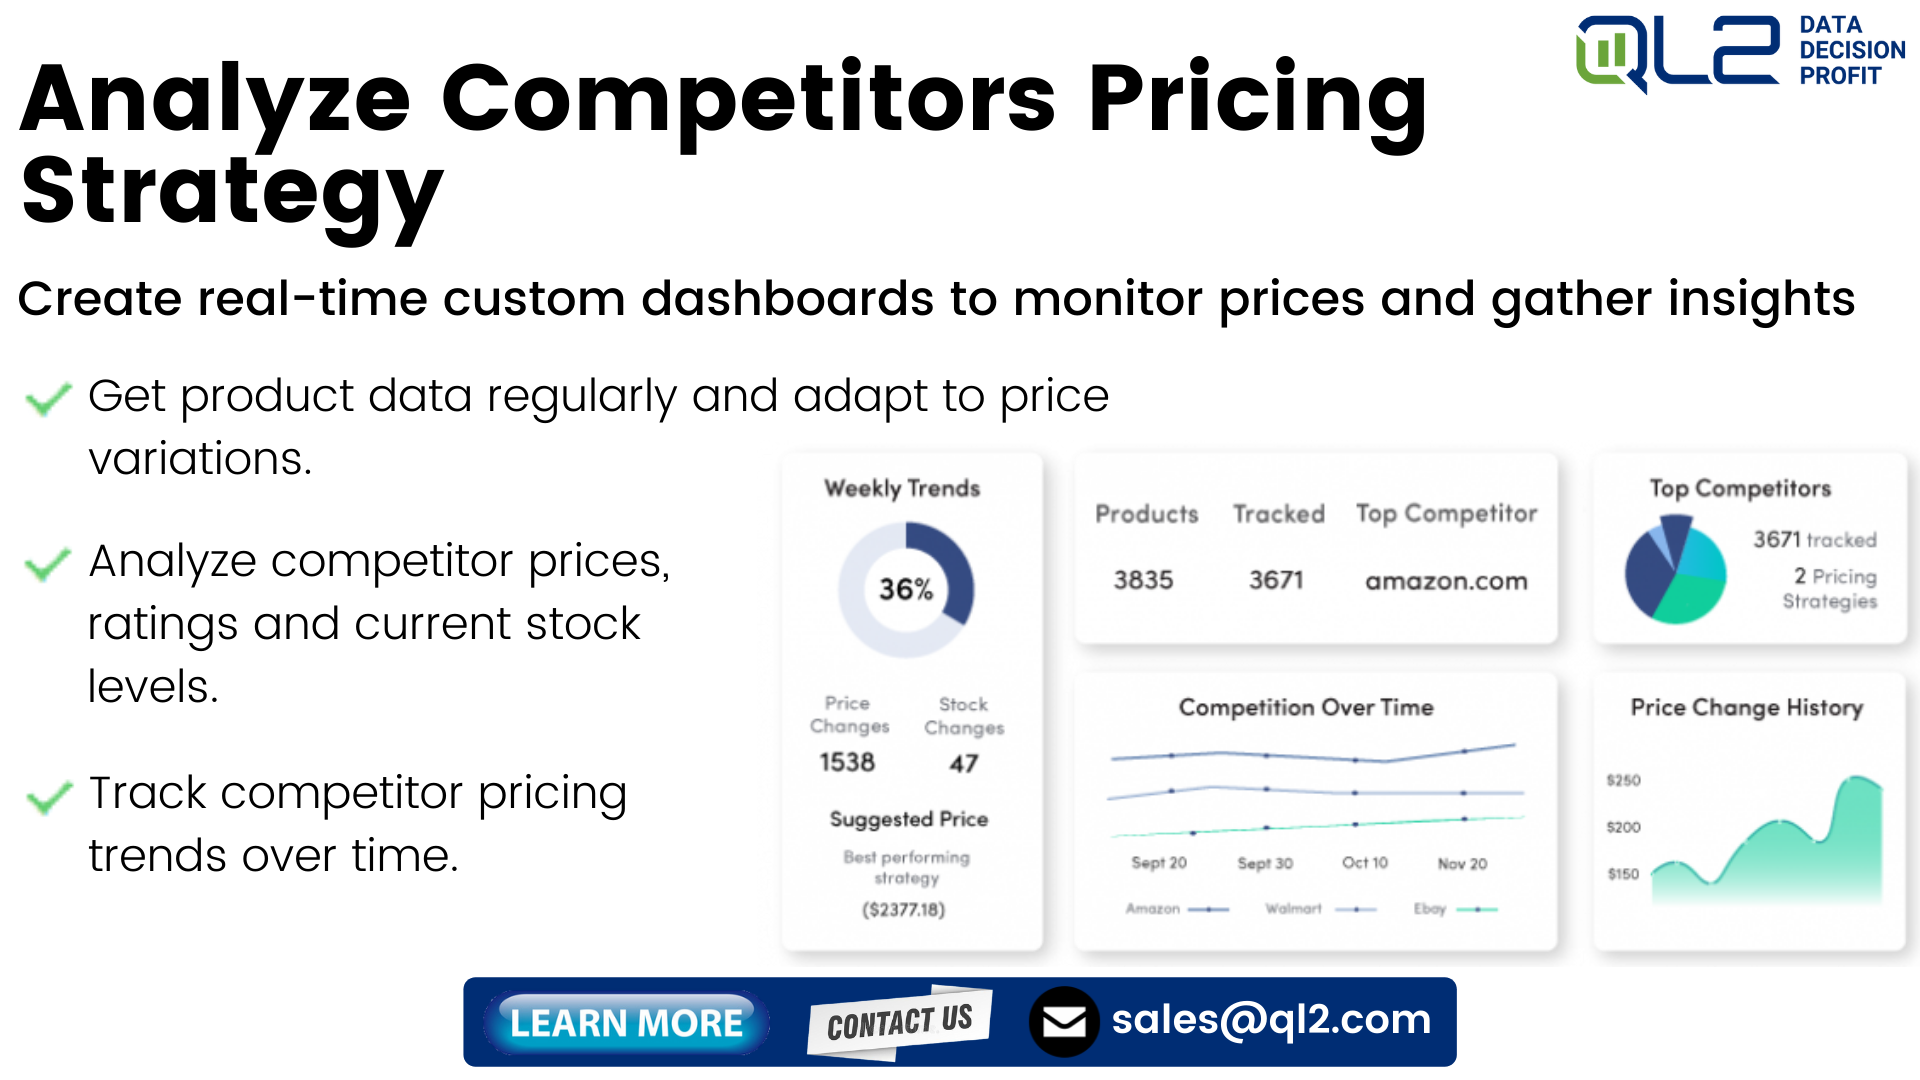 Create real-time custom dashboard to monitor prices and gather insights. Get product data regularly and adapt to price variations; analyze competitor prices, ratings, and current stock levels; and track competitor pricing trends over time.